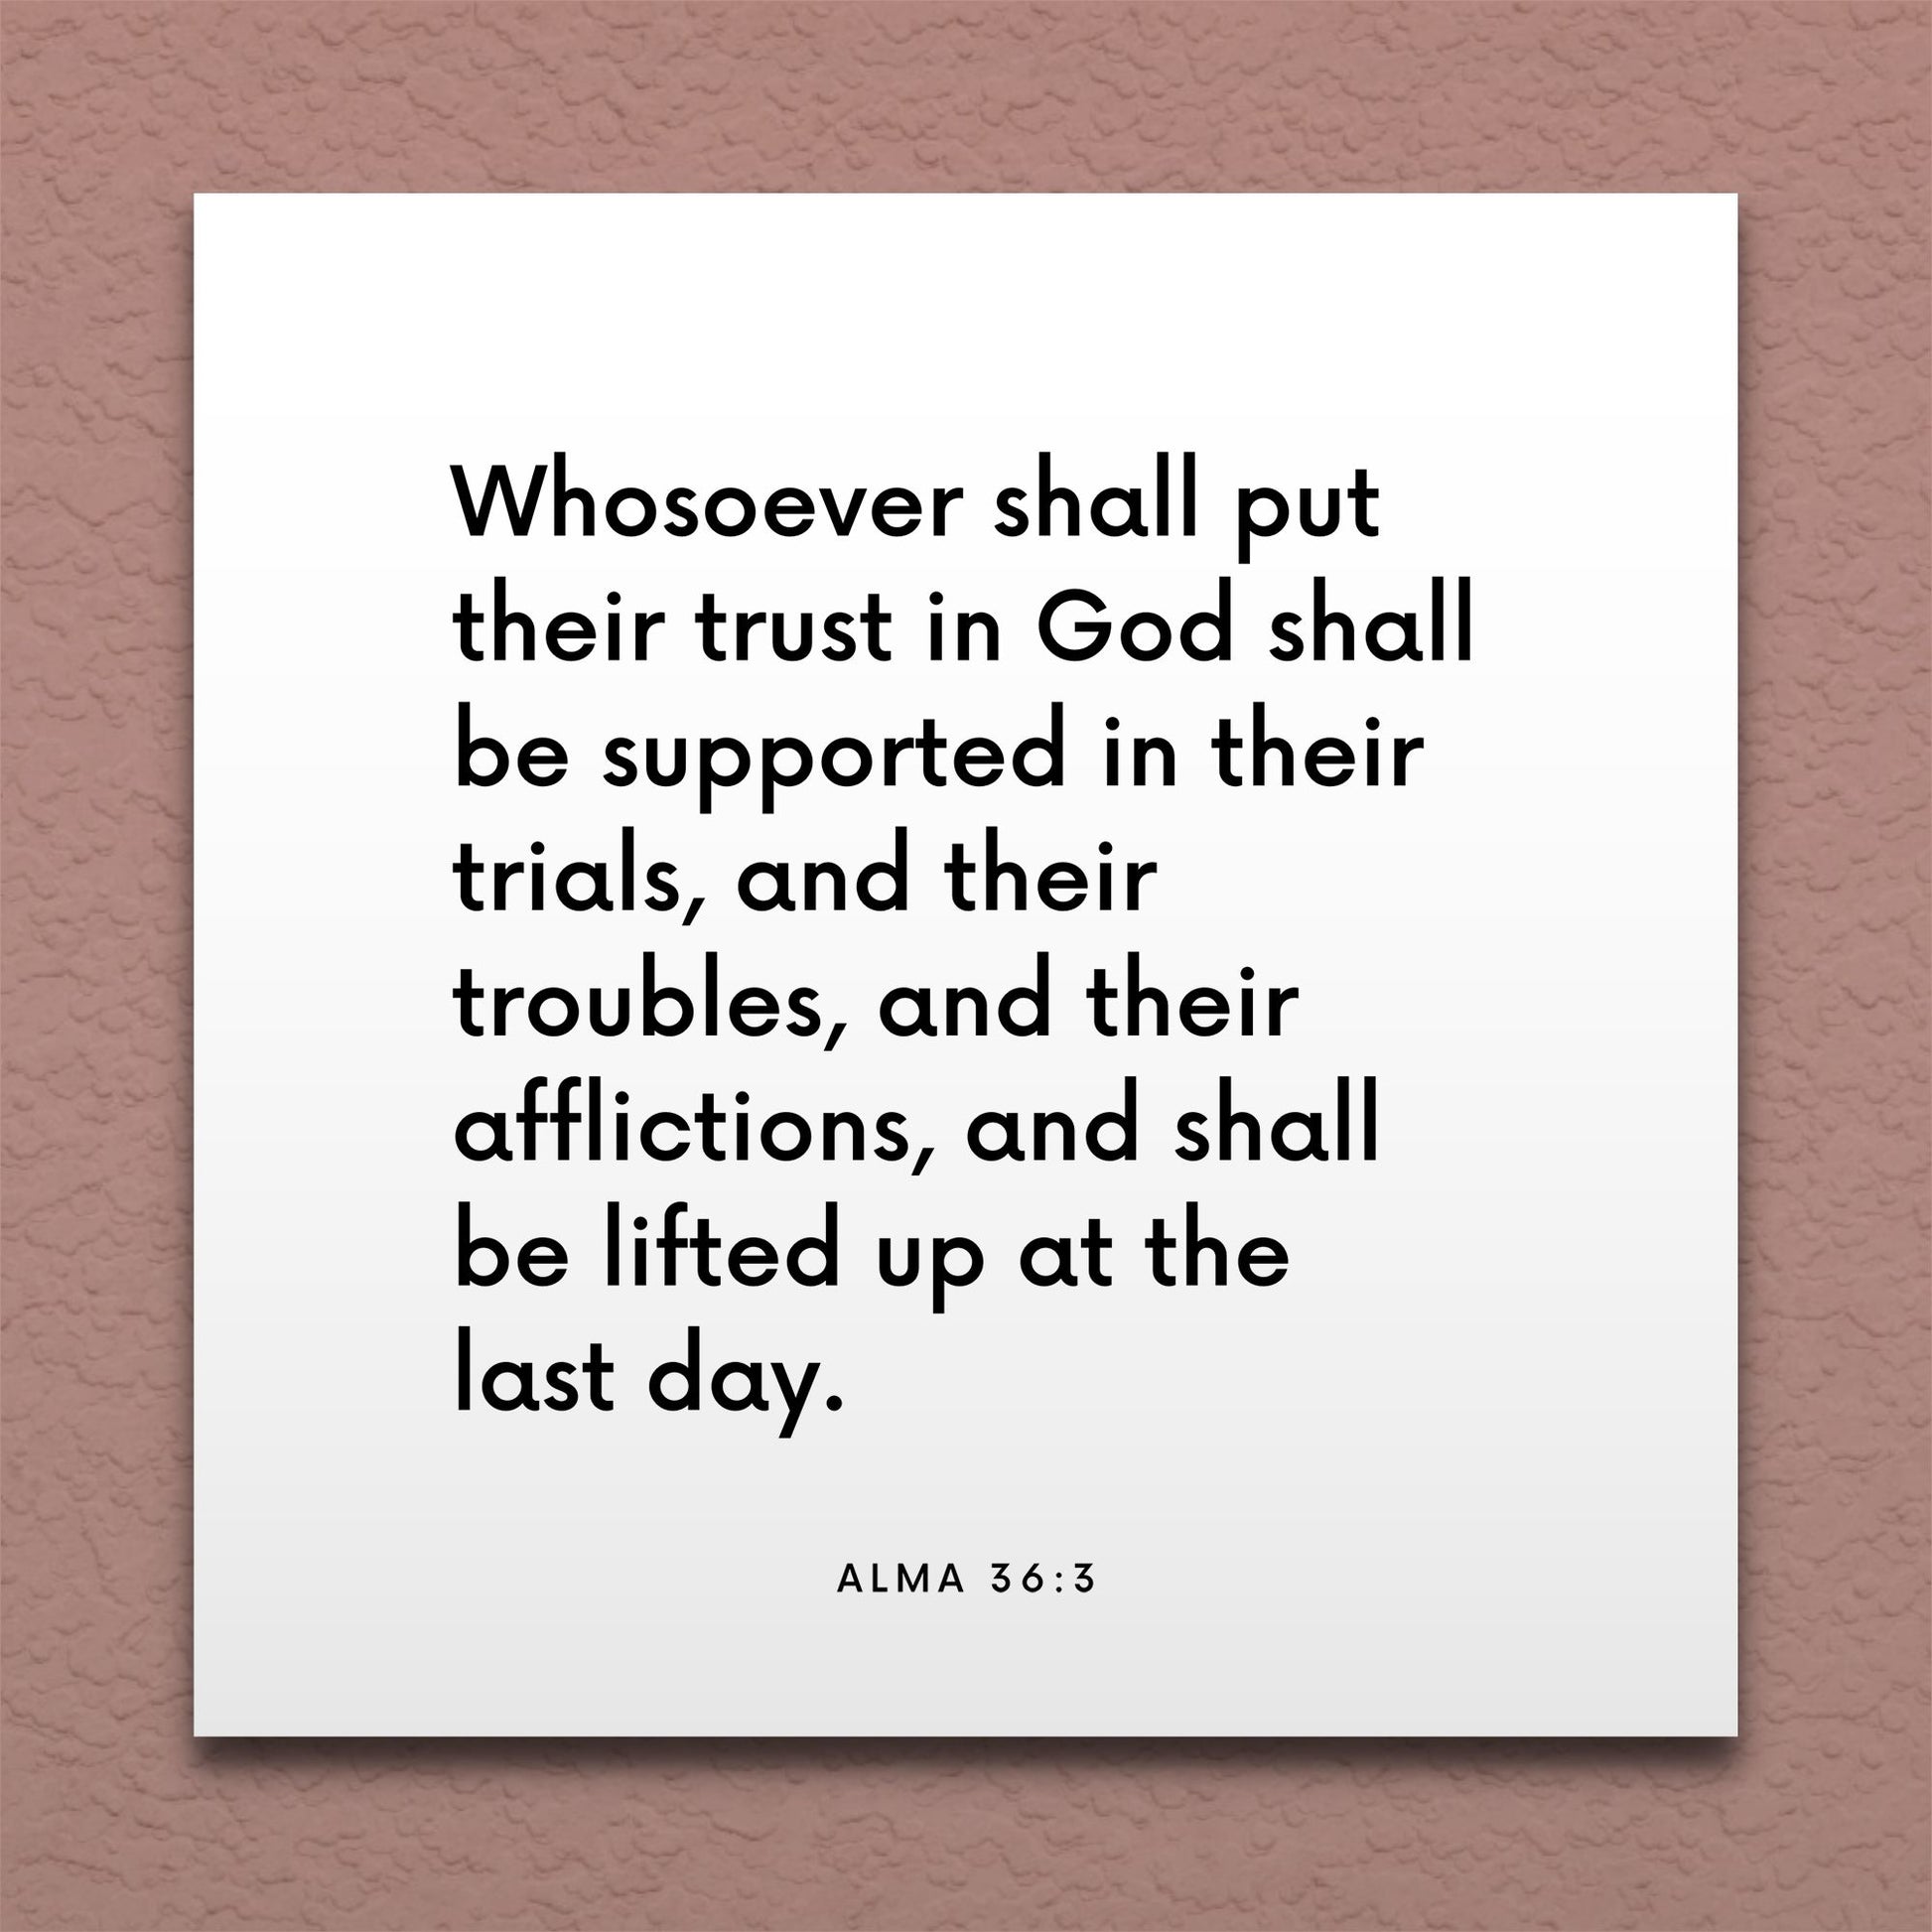 Wall-mounted scripture tile for Alma 36:3 - "Whosoever shall put their trust in God"